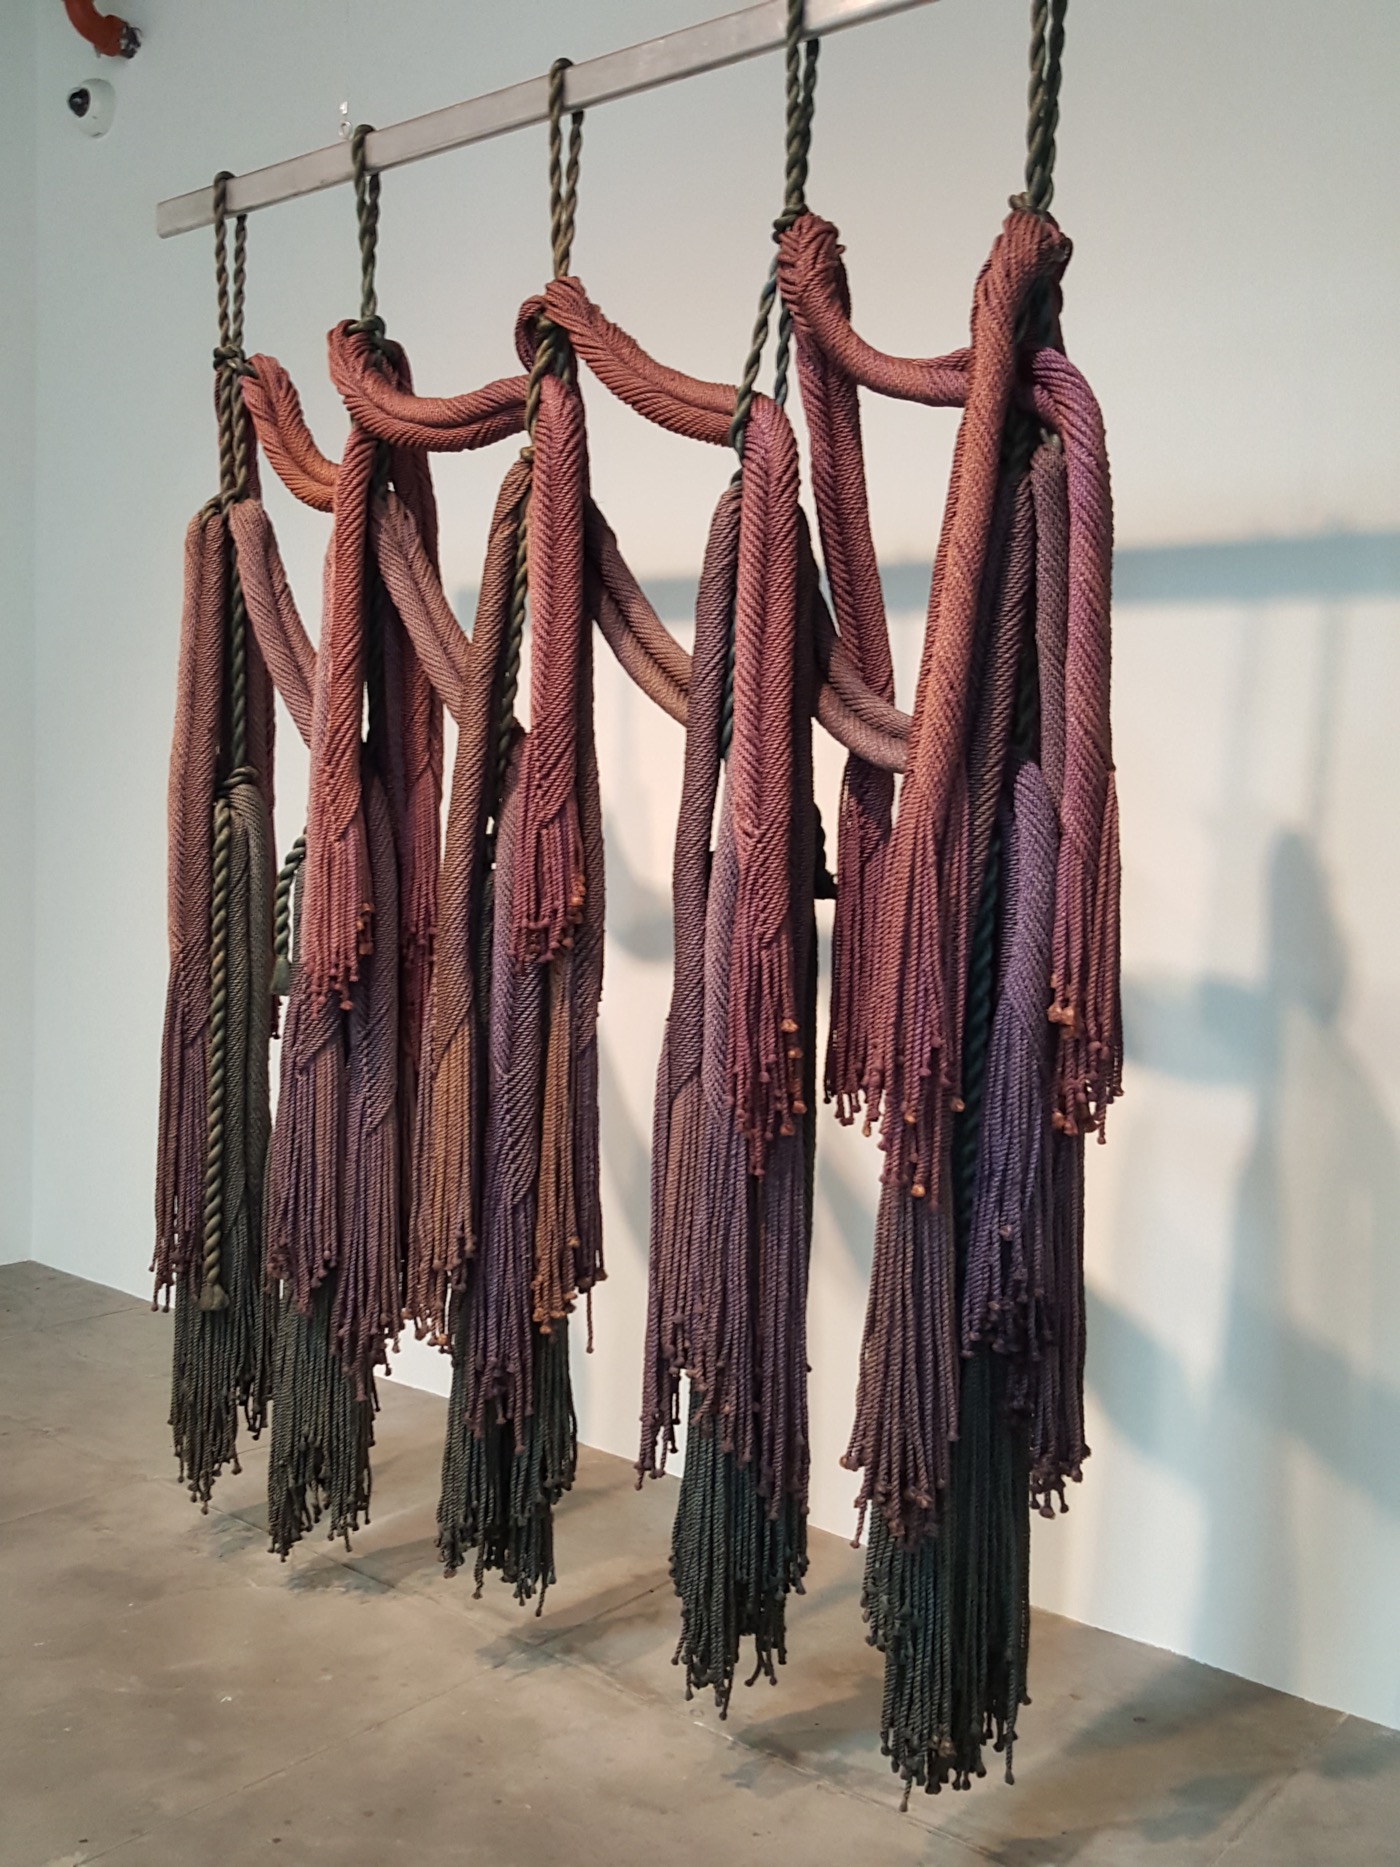 Françoise Grossen, "Five Rivers" (1974) at Hauser, Wirth and Schimmel gallery